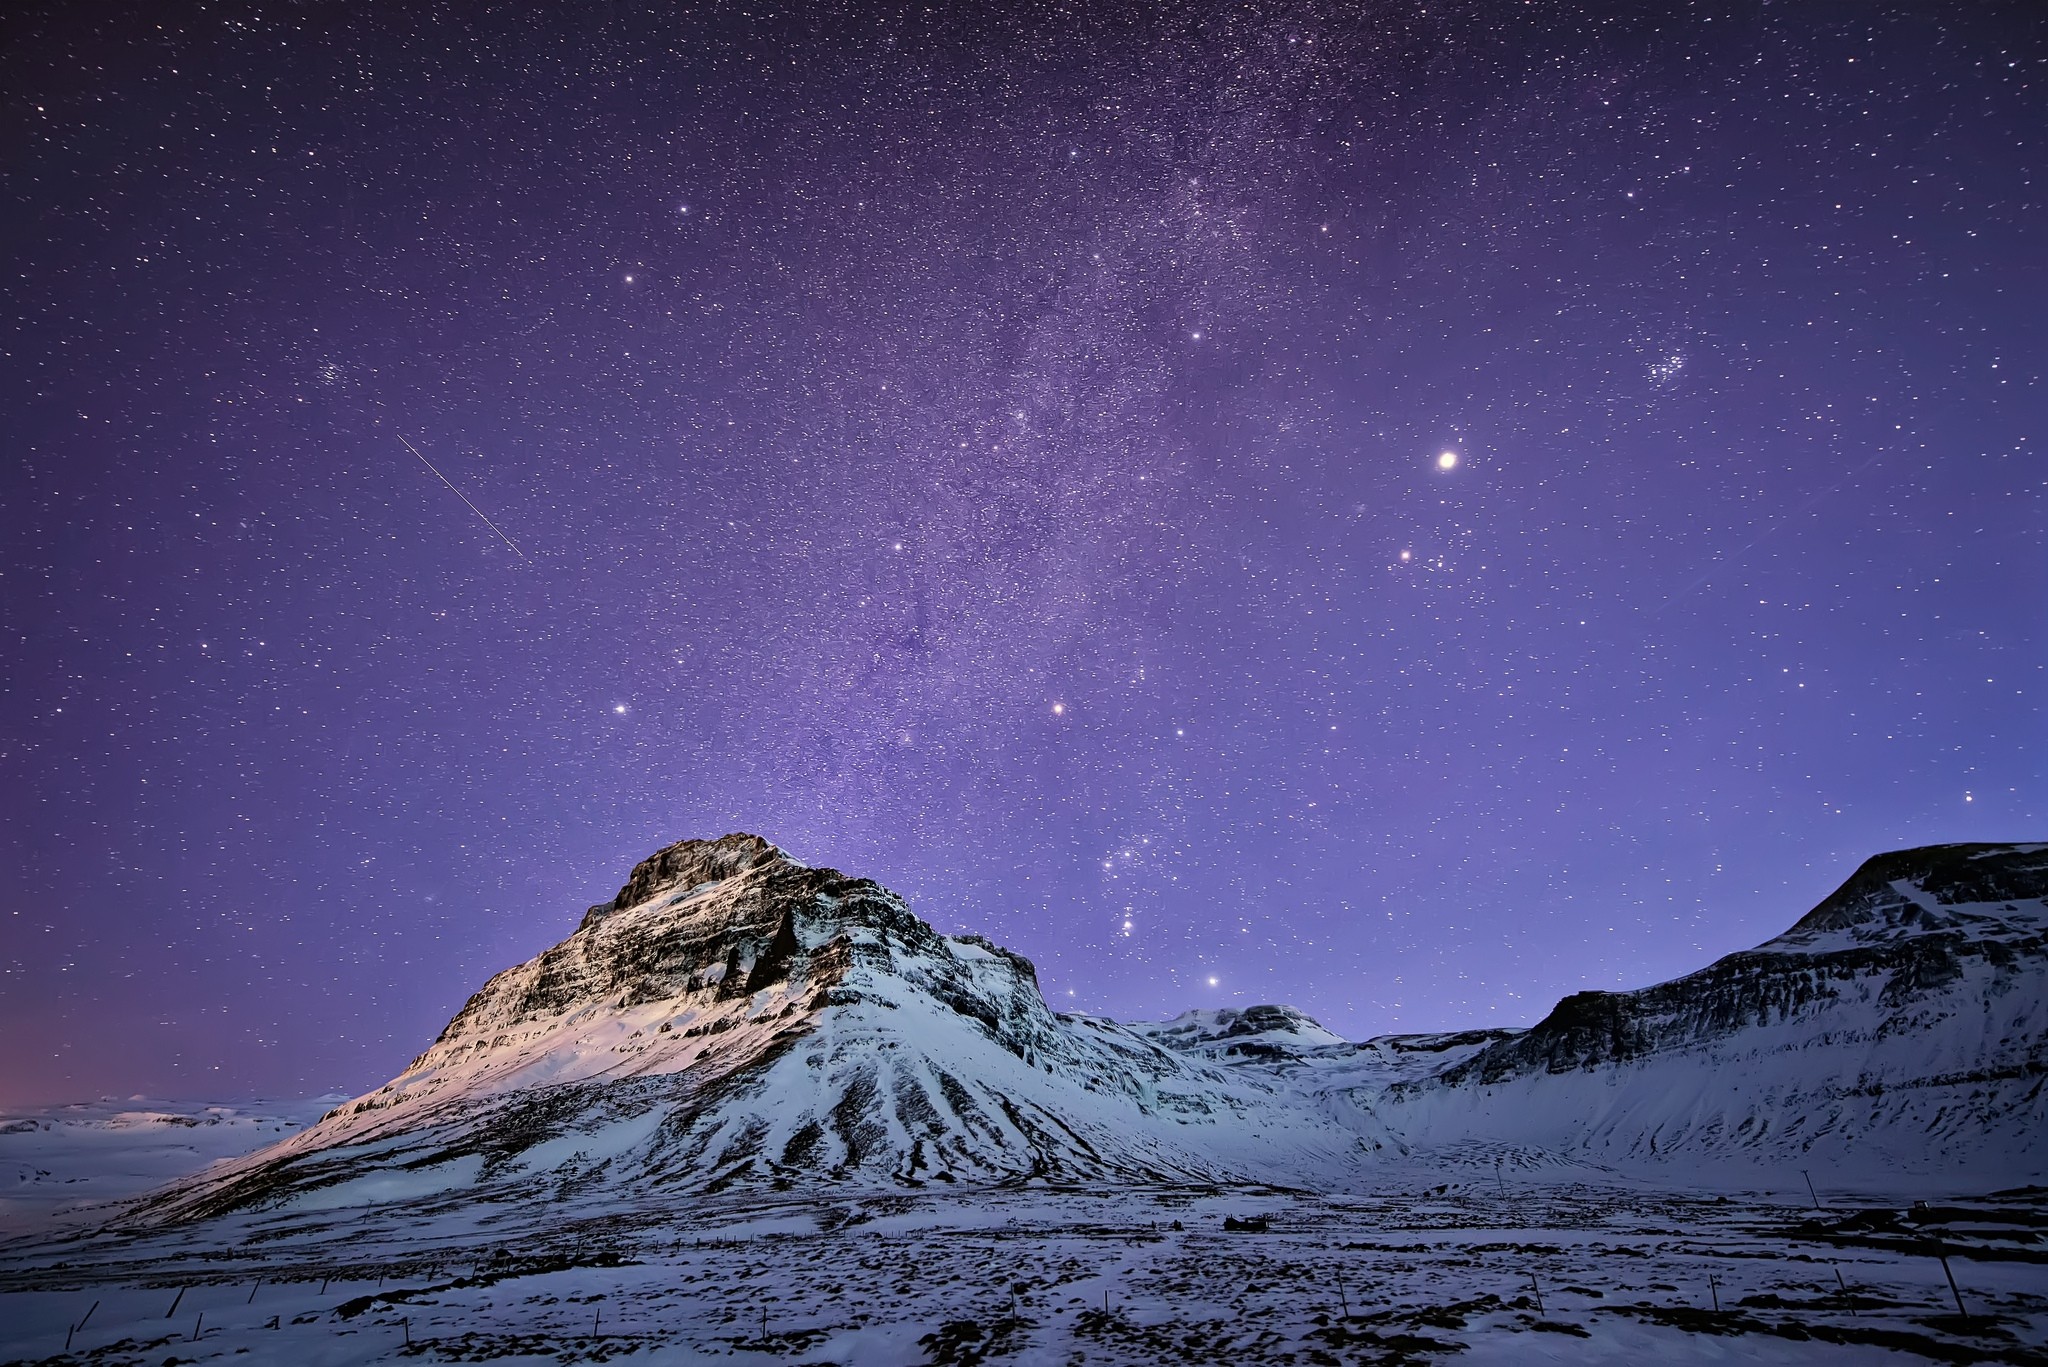 General 2048x1367 nature skyscape stars starry night mountains snow winter ice cold space